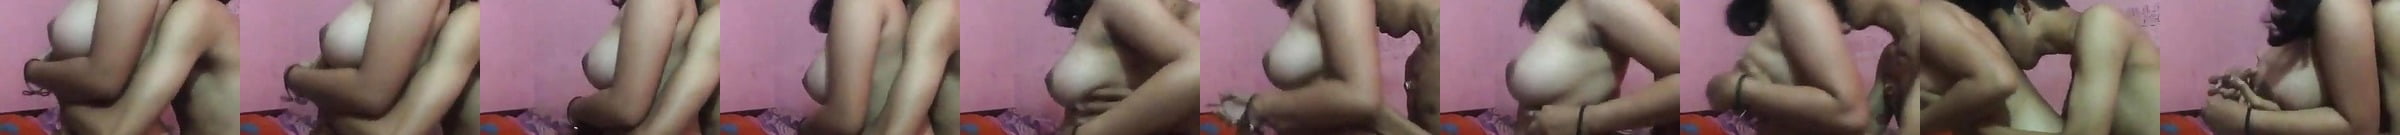 Alizeh Shah Viral Cum Swallowing Porn Video 70 Xhamster